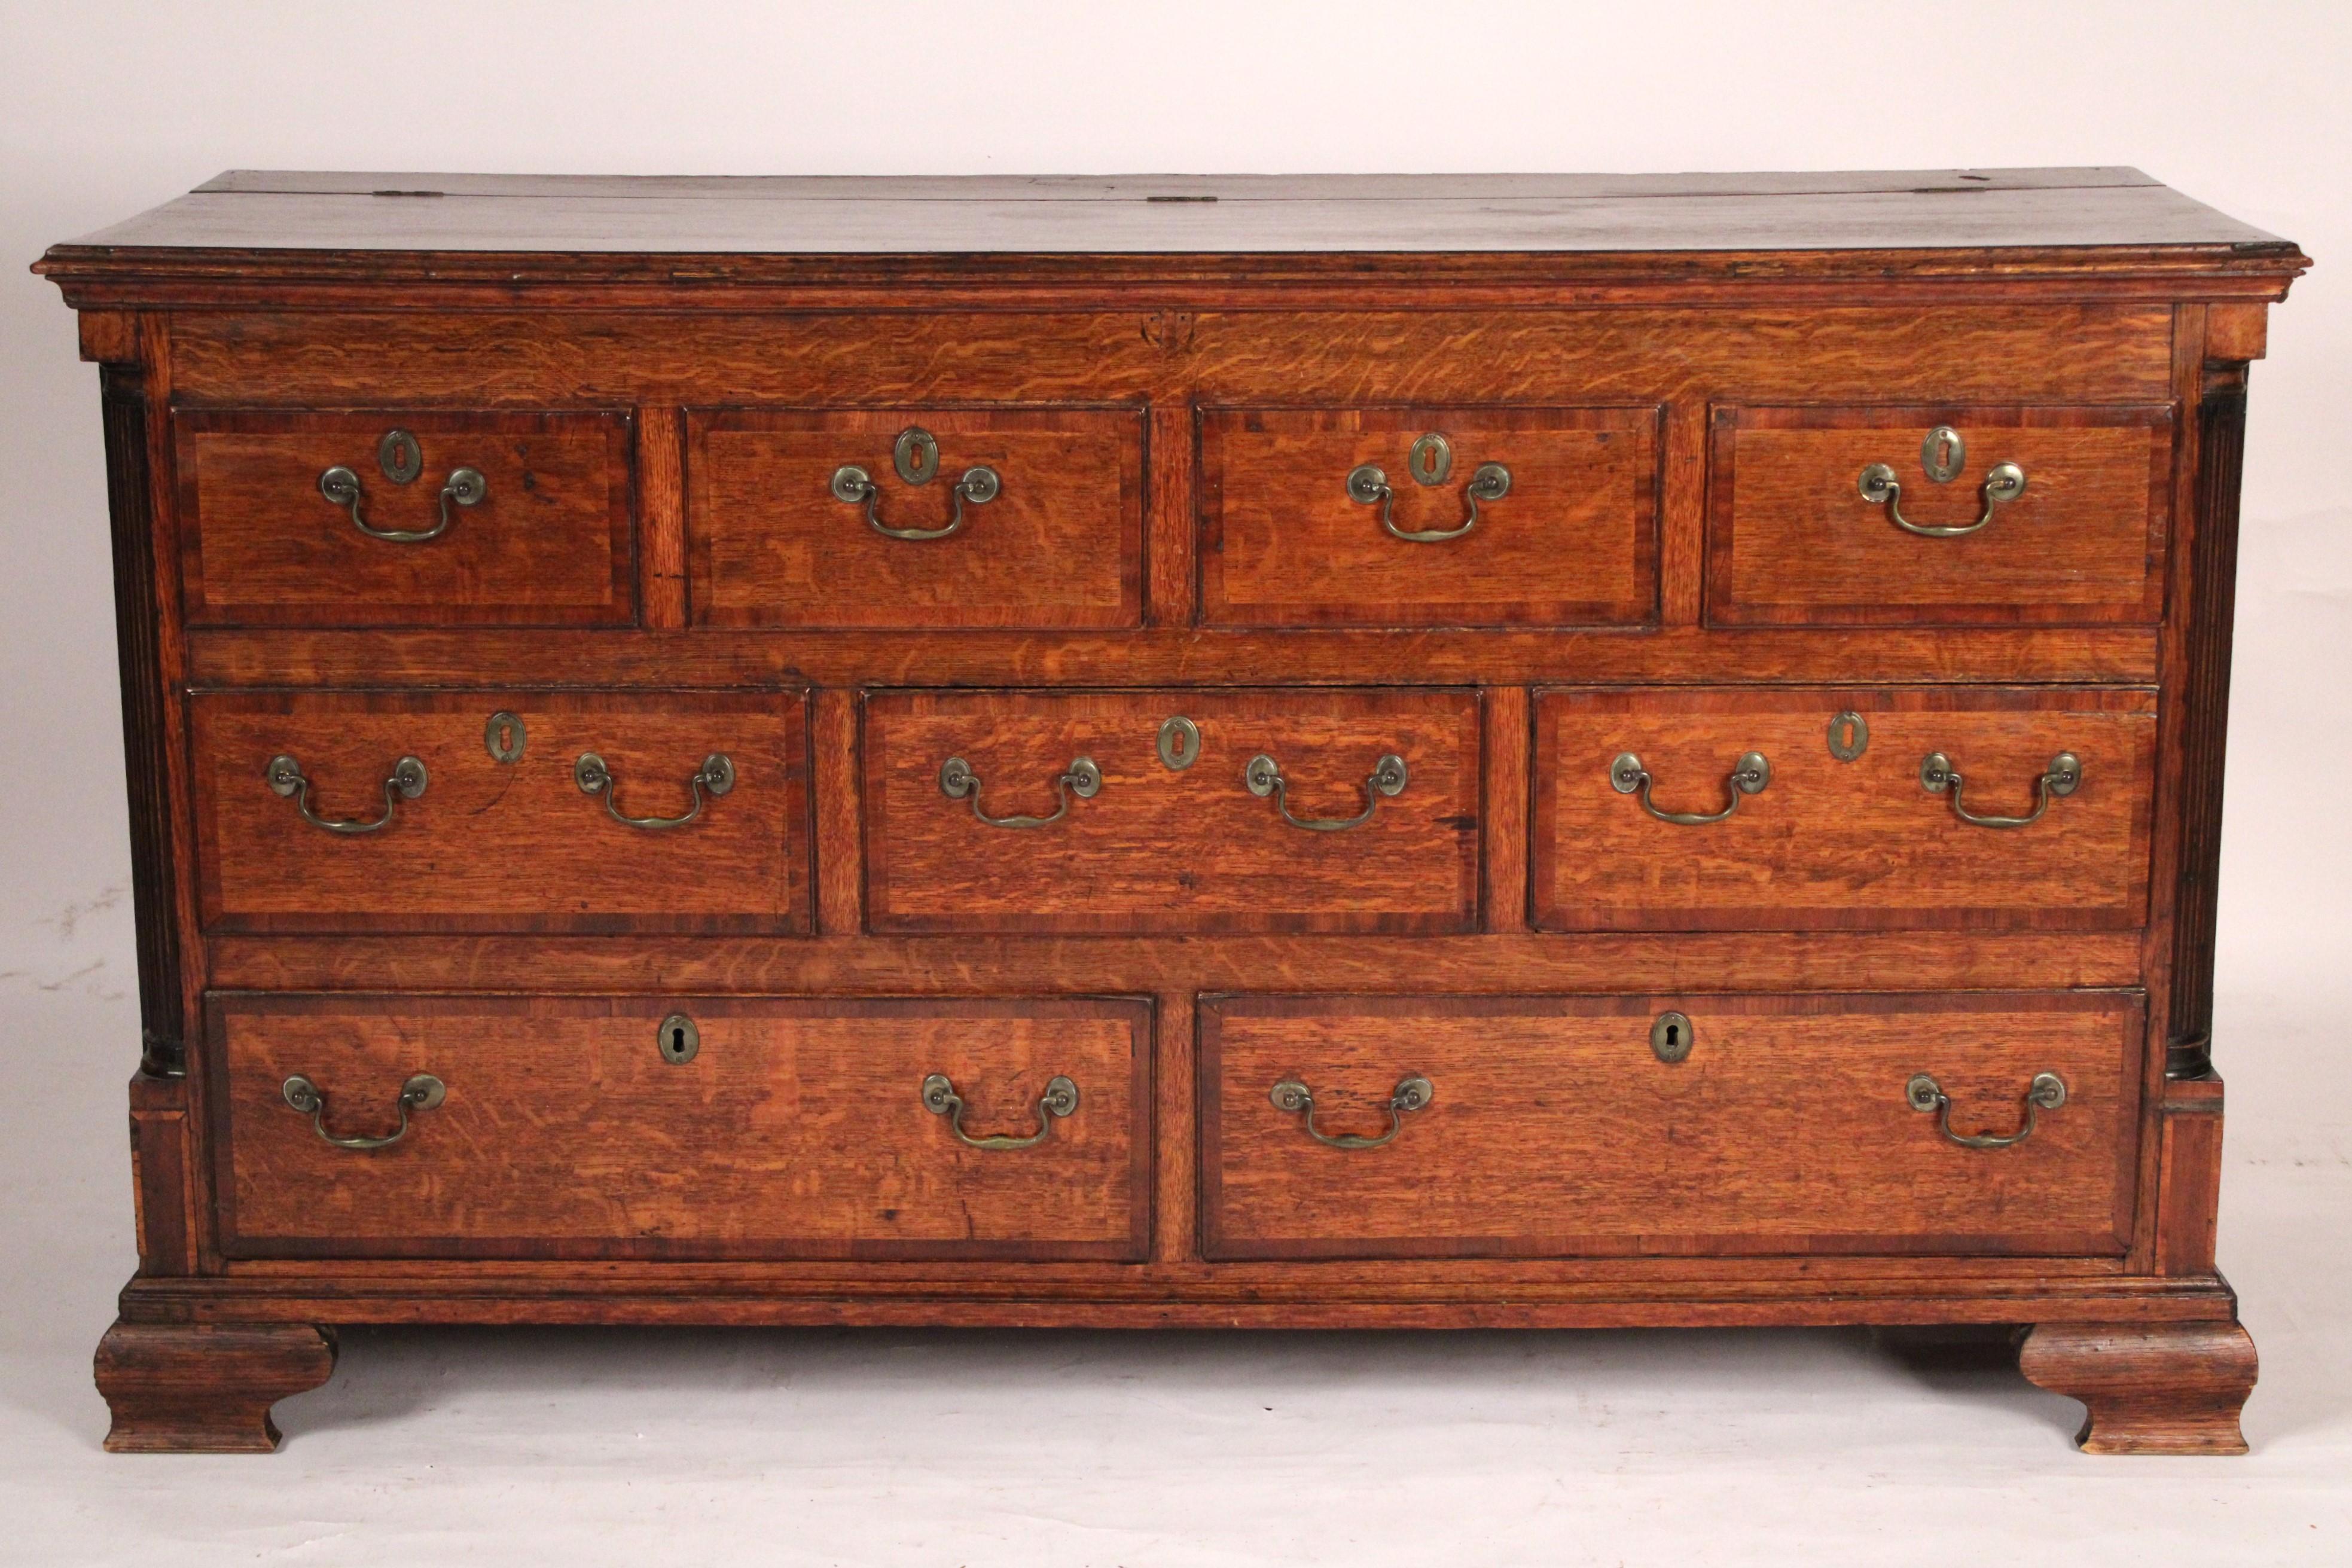 Antique George III style oak sideboard, 19th century. With an overhanging top with thumb molded front and side edges, over 4 quarter sawn oak drawers with mahogany cross banding, over 3 drawers and two bottom drawers, split fluted columns on each